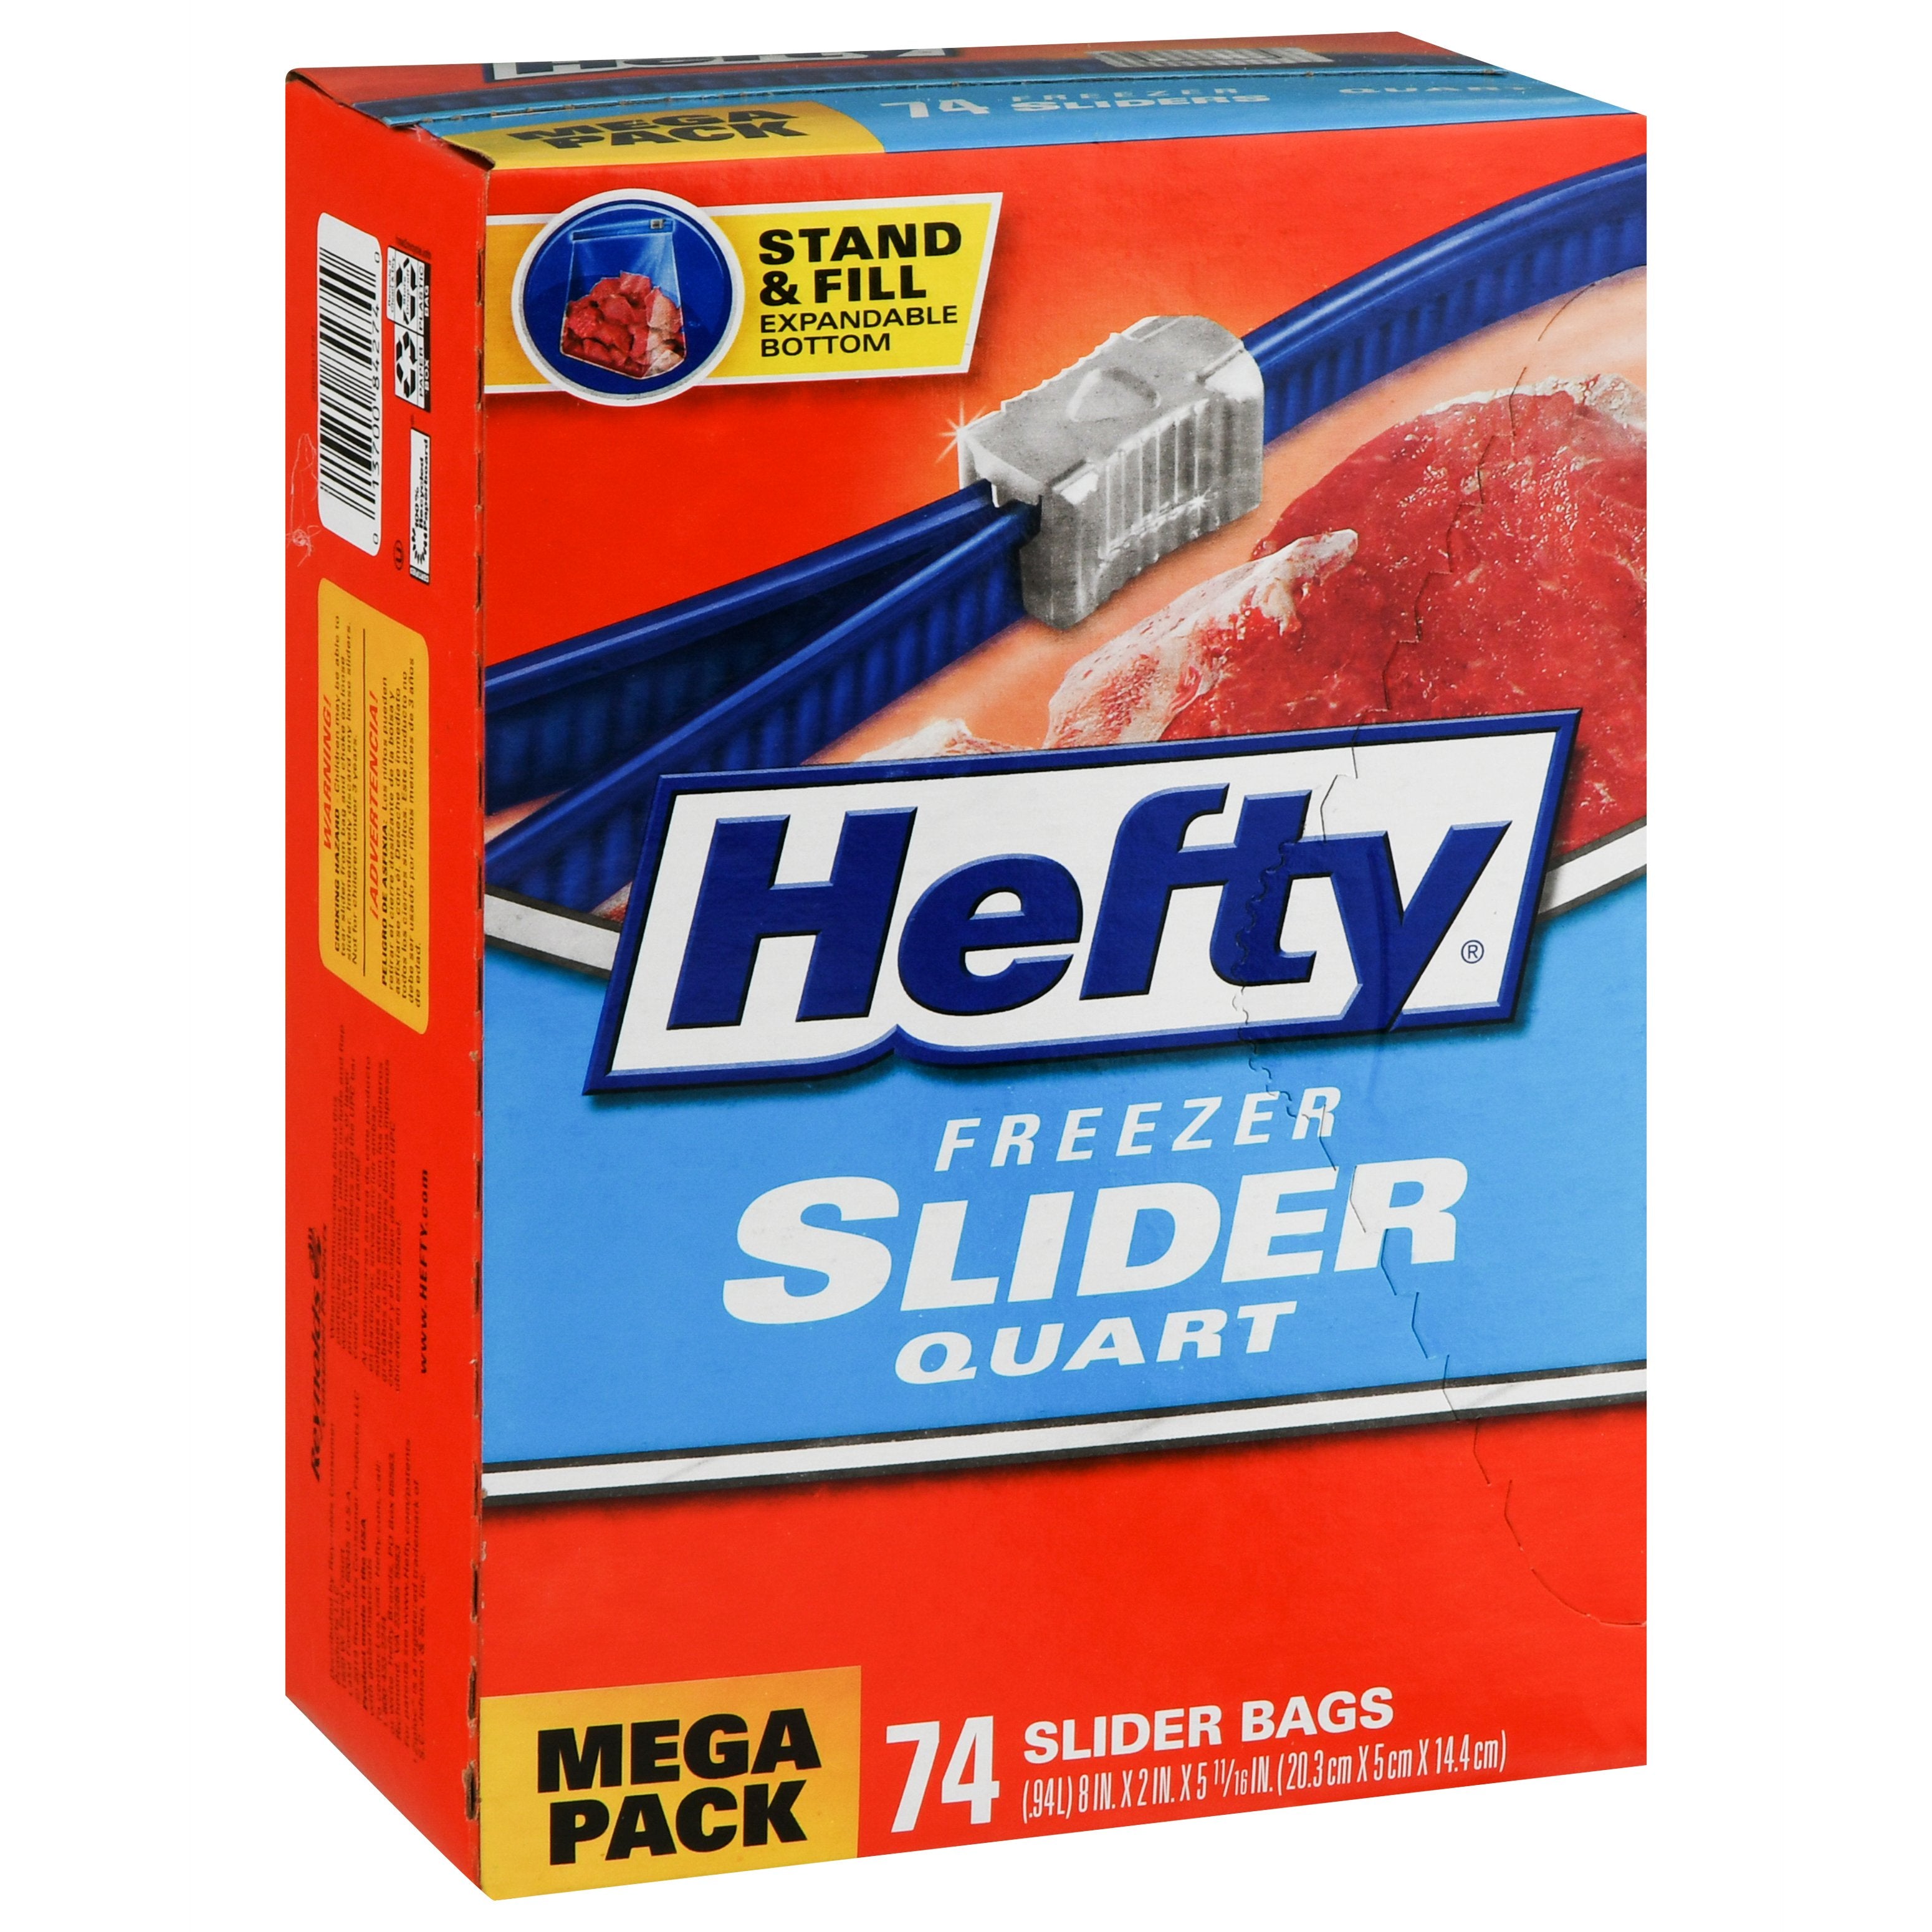 Hefty Slider Gallon Freezer Bags 10 Count (Pack of 3)